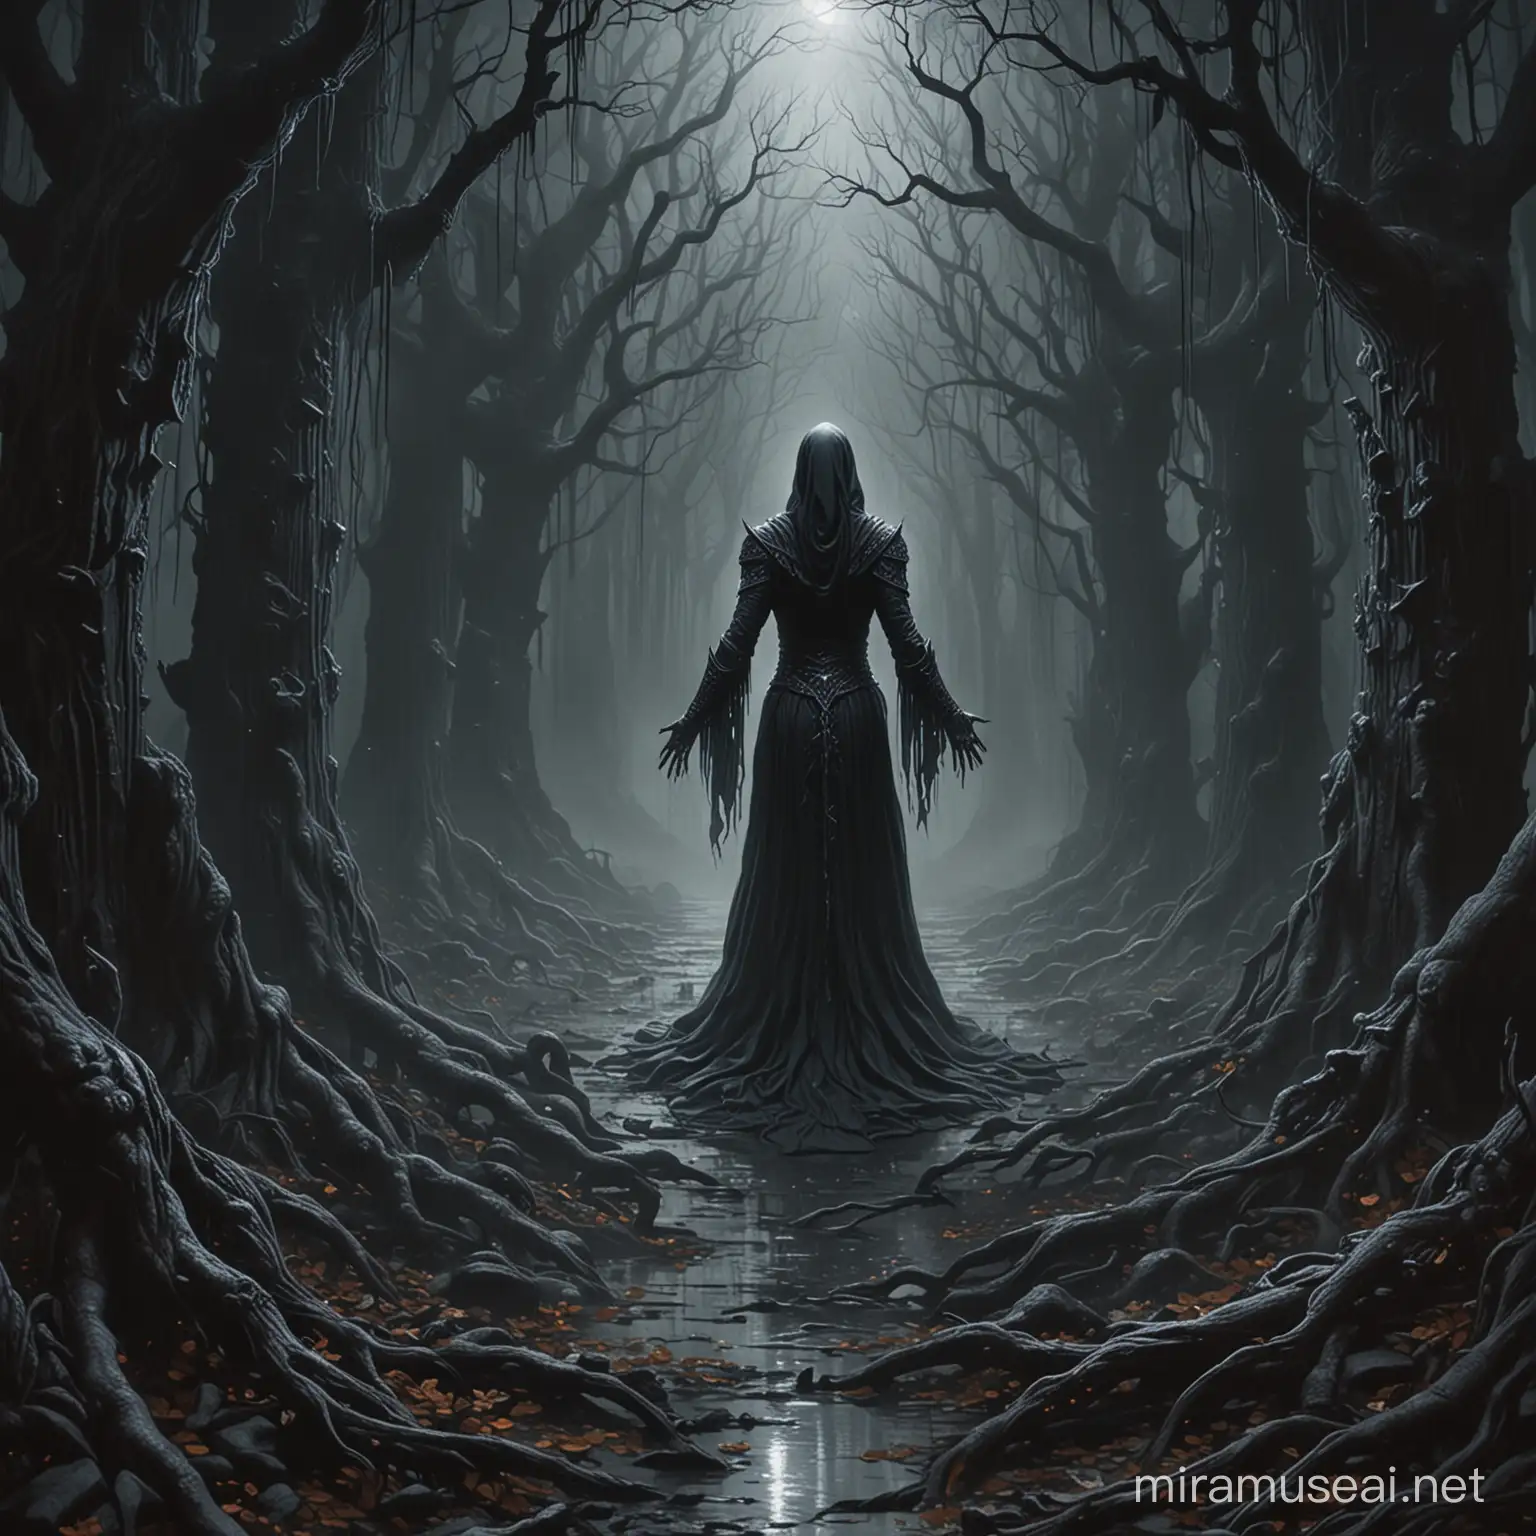 Dark, Obsidian Abyss
Labyrinth of Shadows
Whispers in the Twilight
Specters of the Mind
Ethereal Depths
Into the Abyss